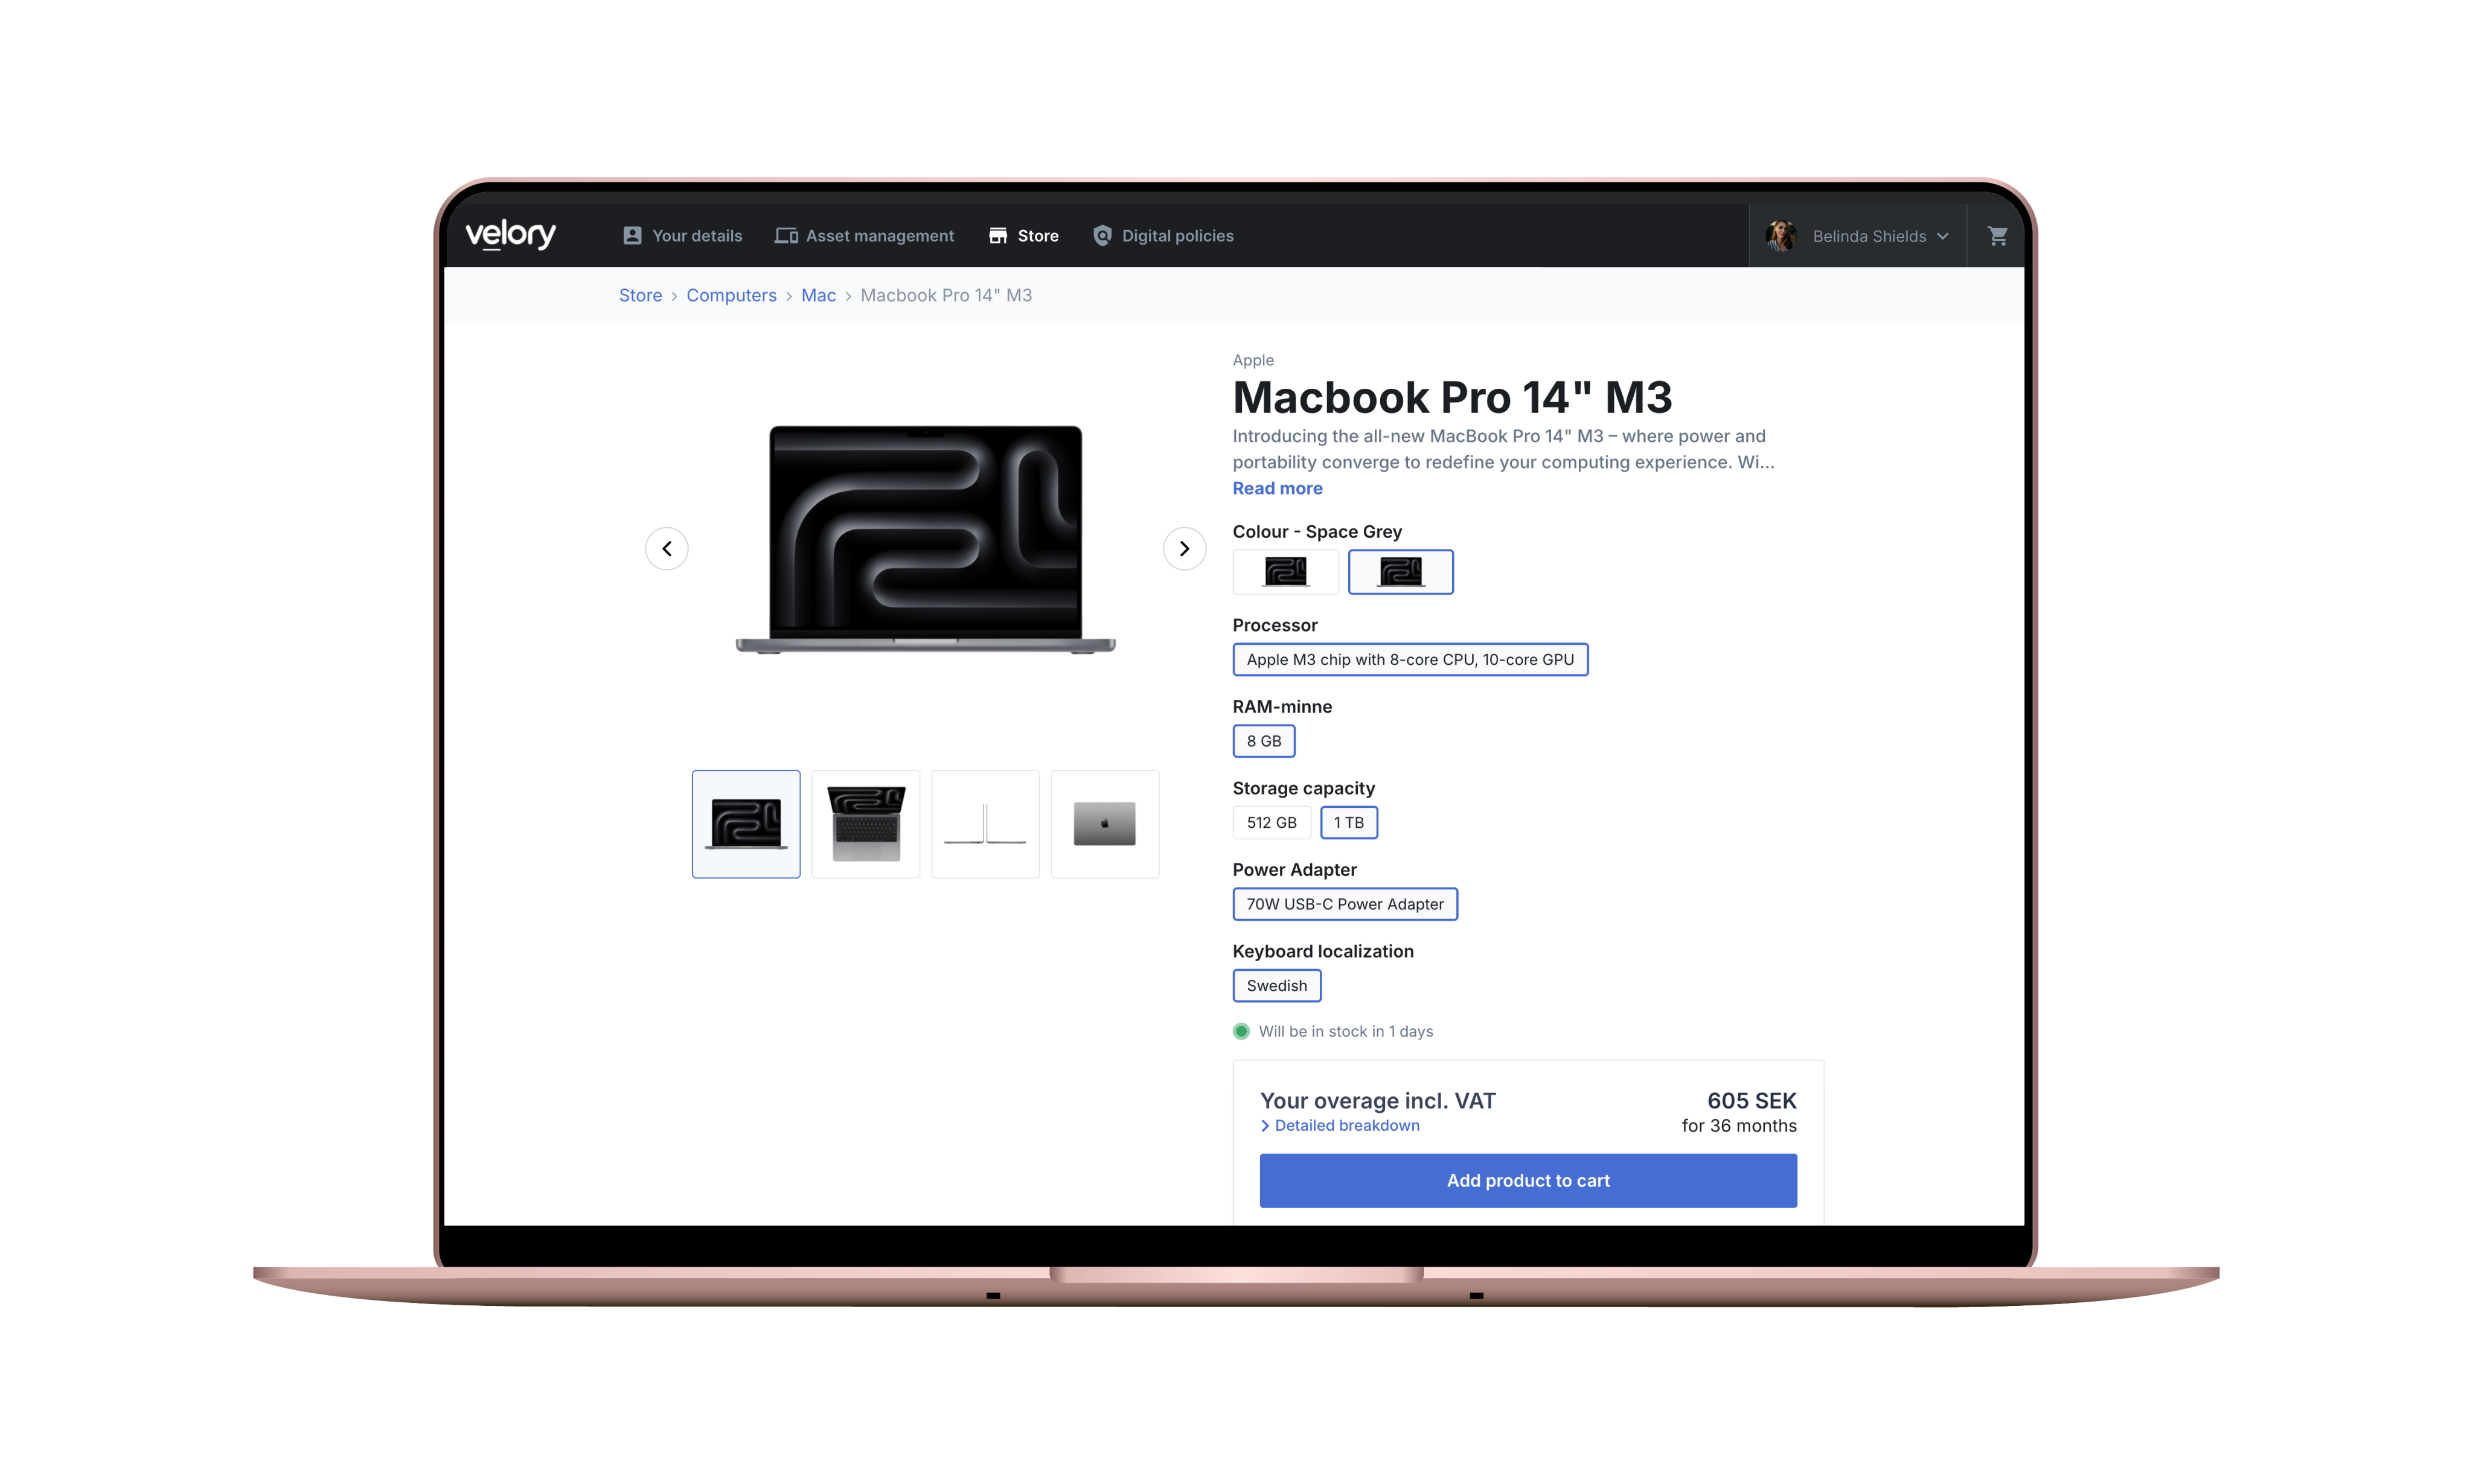 Velory Product View Page: Easily access detailed product descriptions and variations